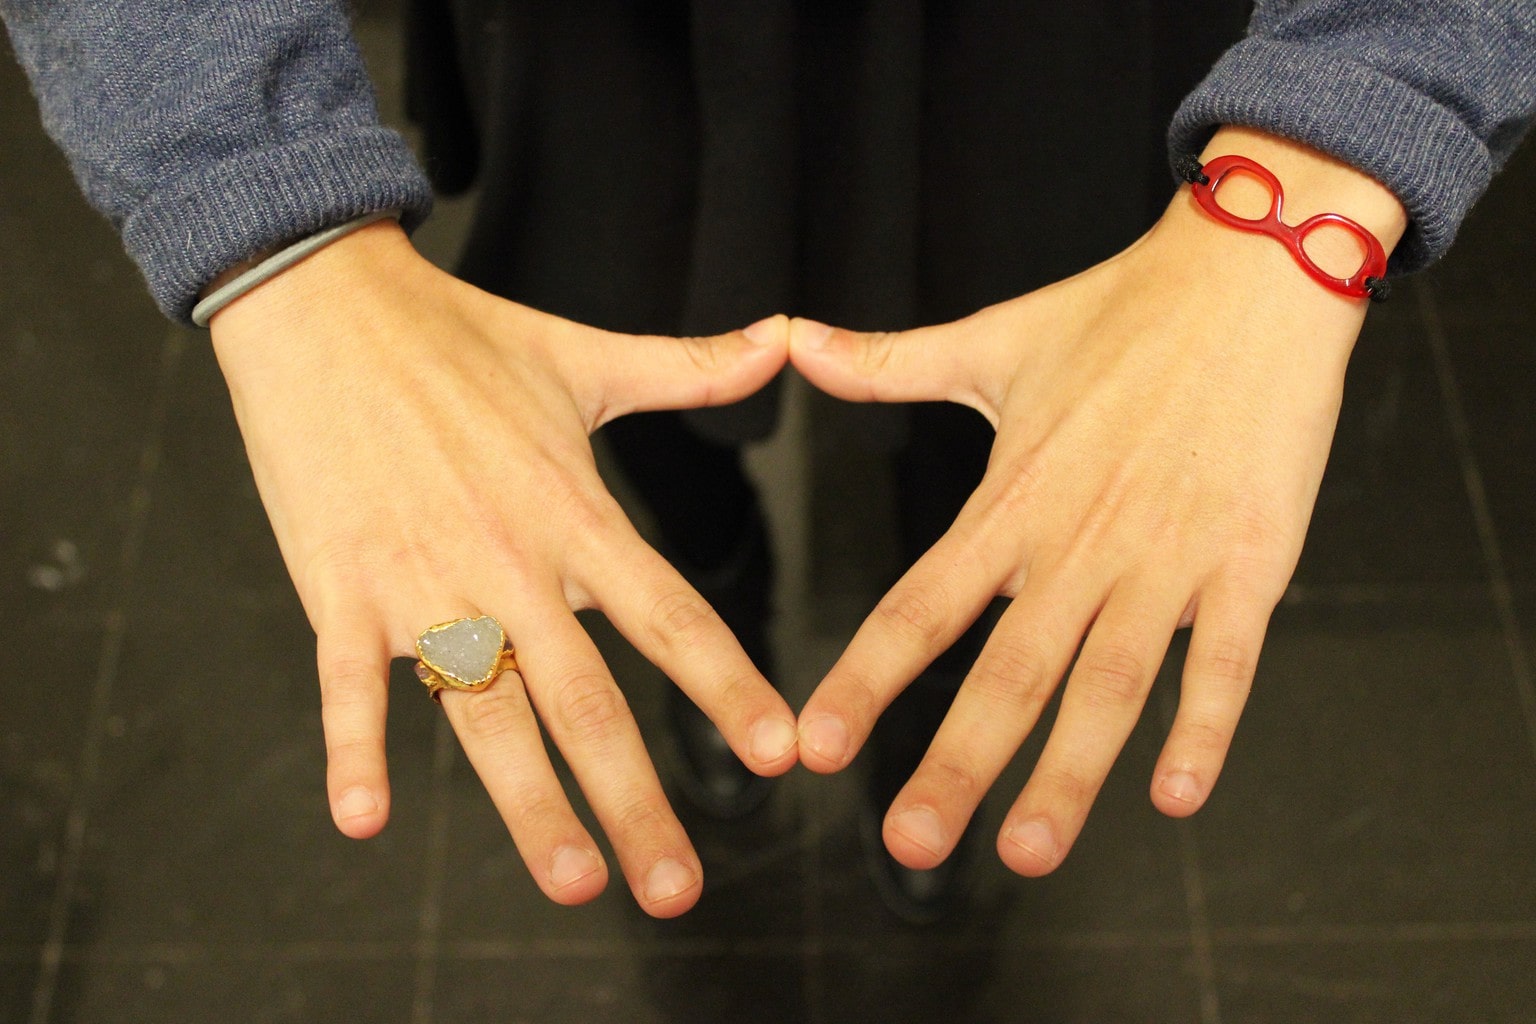 A student at Barnard College wears a bright red eyeglasses bracelet and a large gold and druzy stone ring.